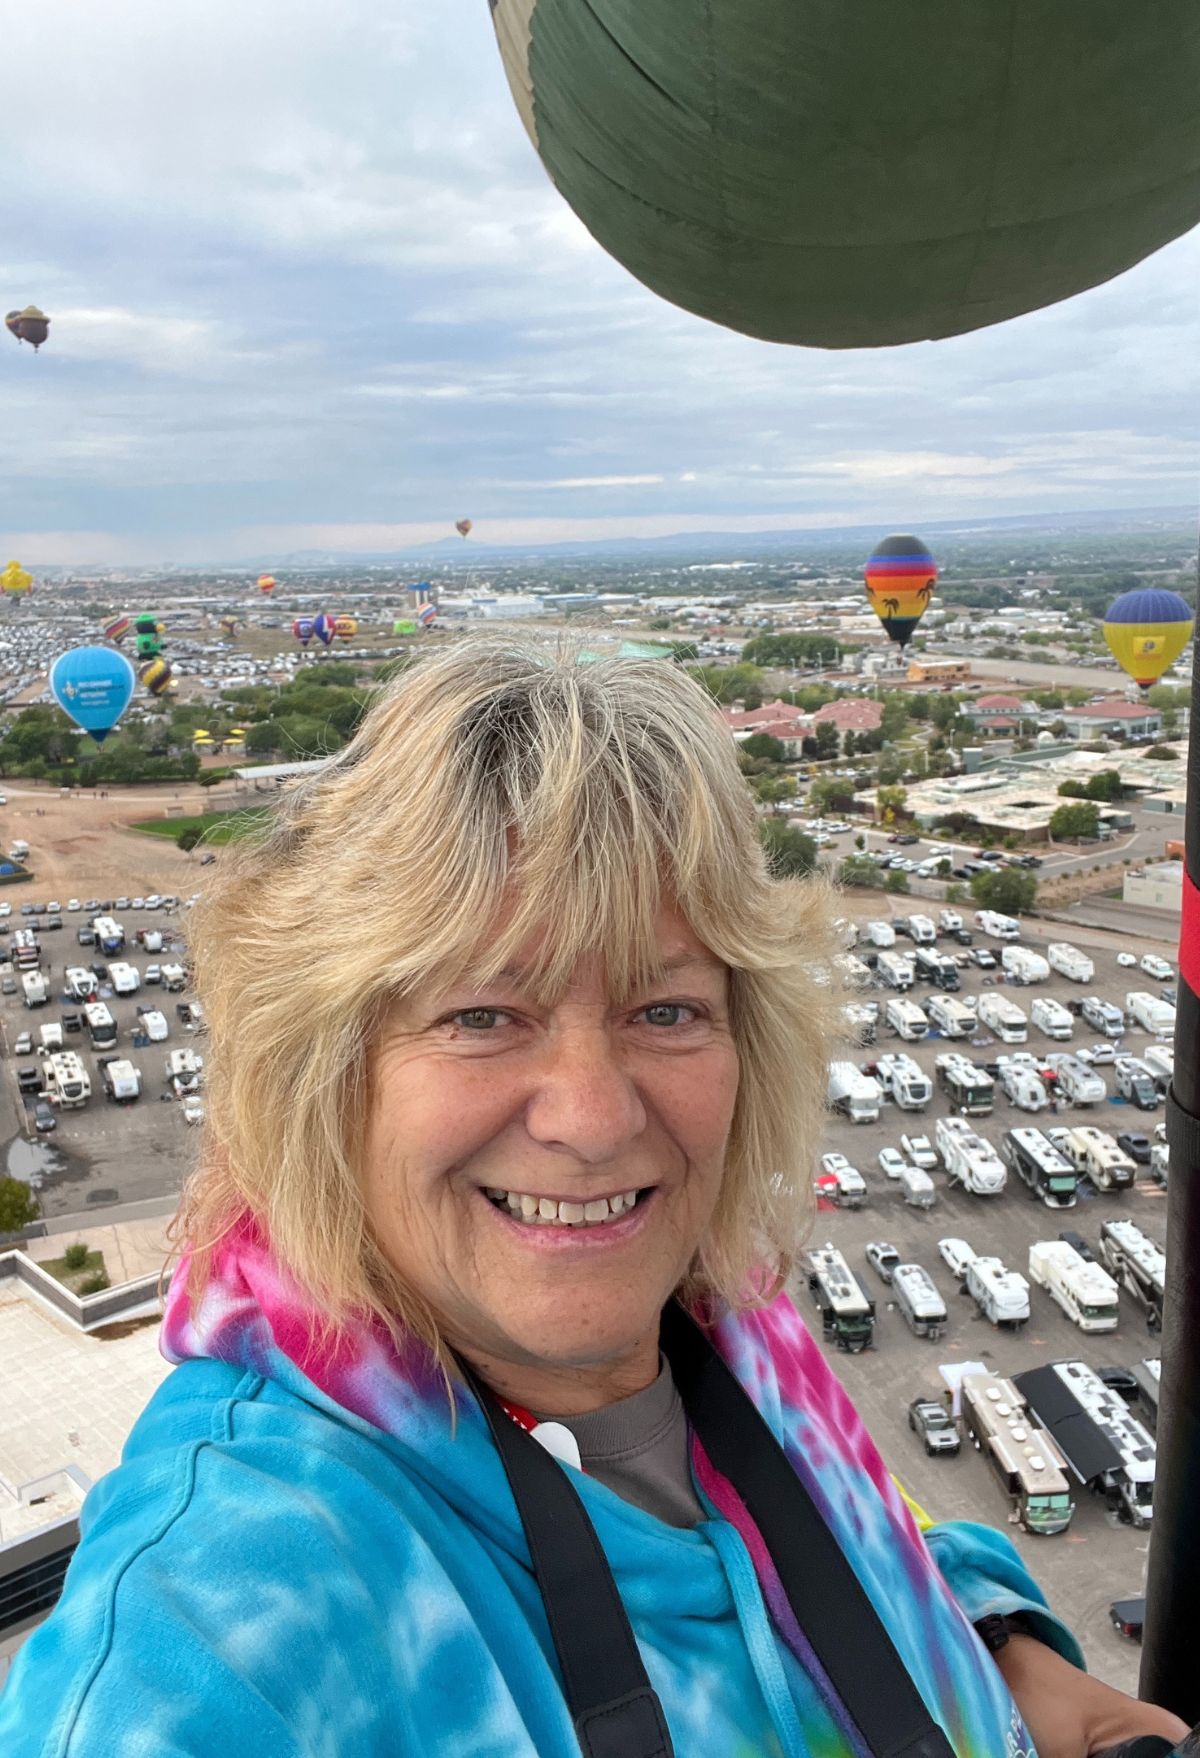 A woman smiling in front of a hot air balloon in santa fe, new mexico.